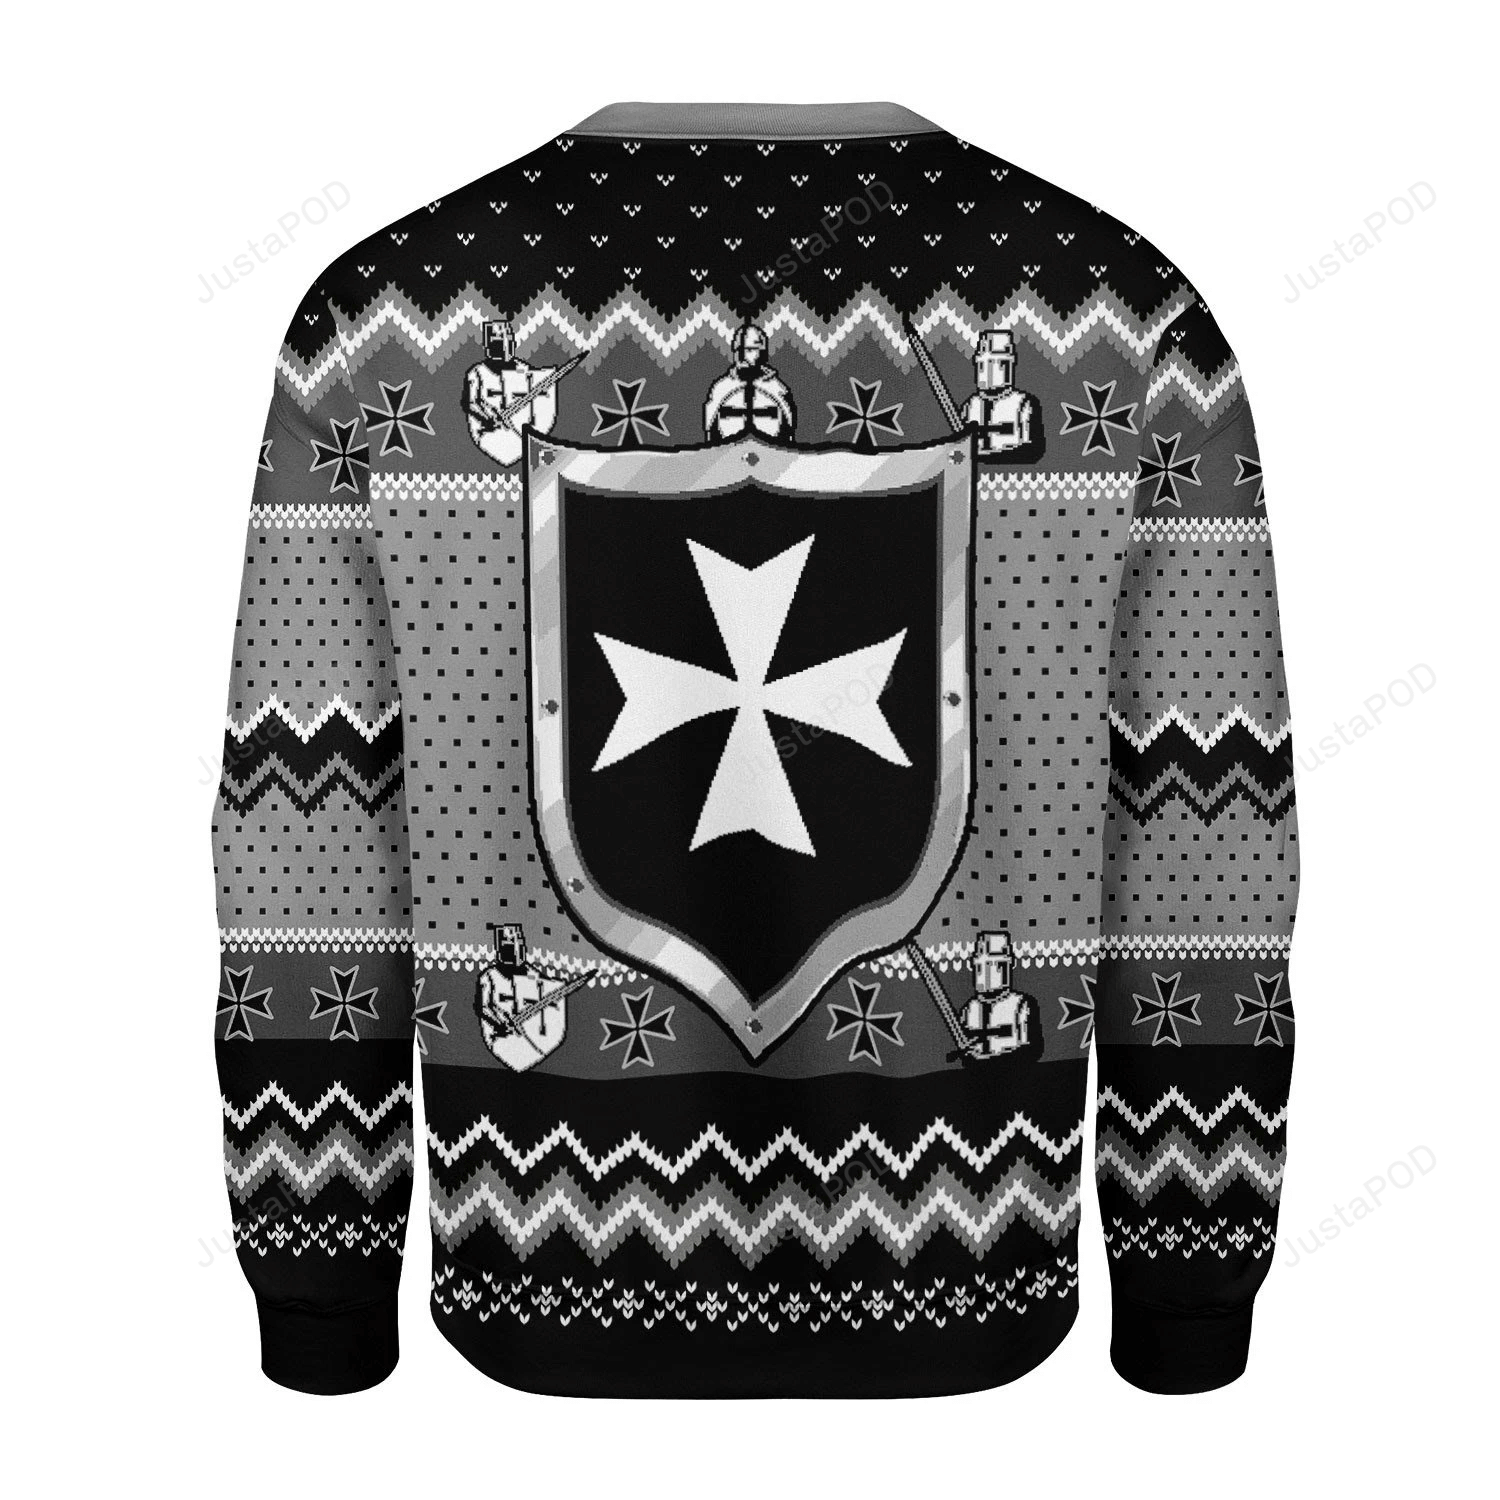 Black Gray Christmas Knights Hospitaller Gearhomies For Unisex Ugly Christmas